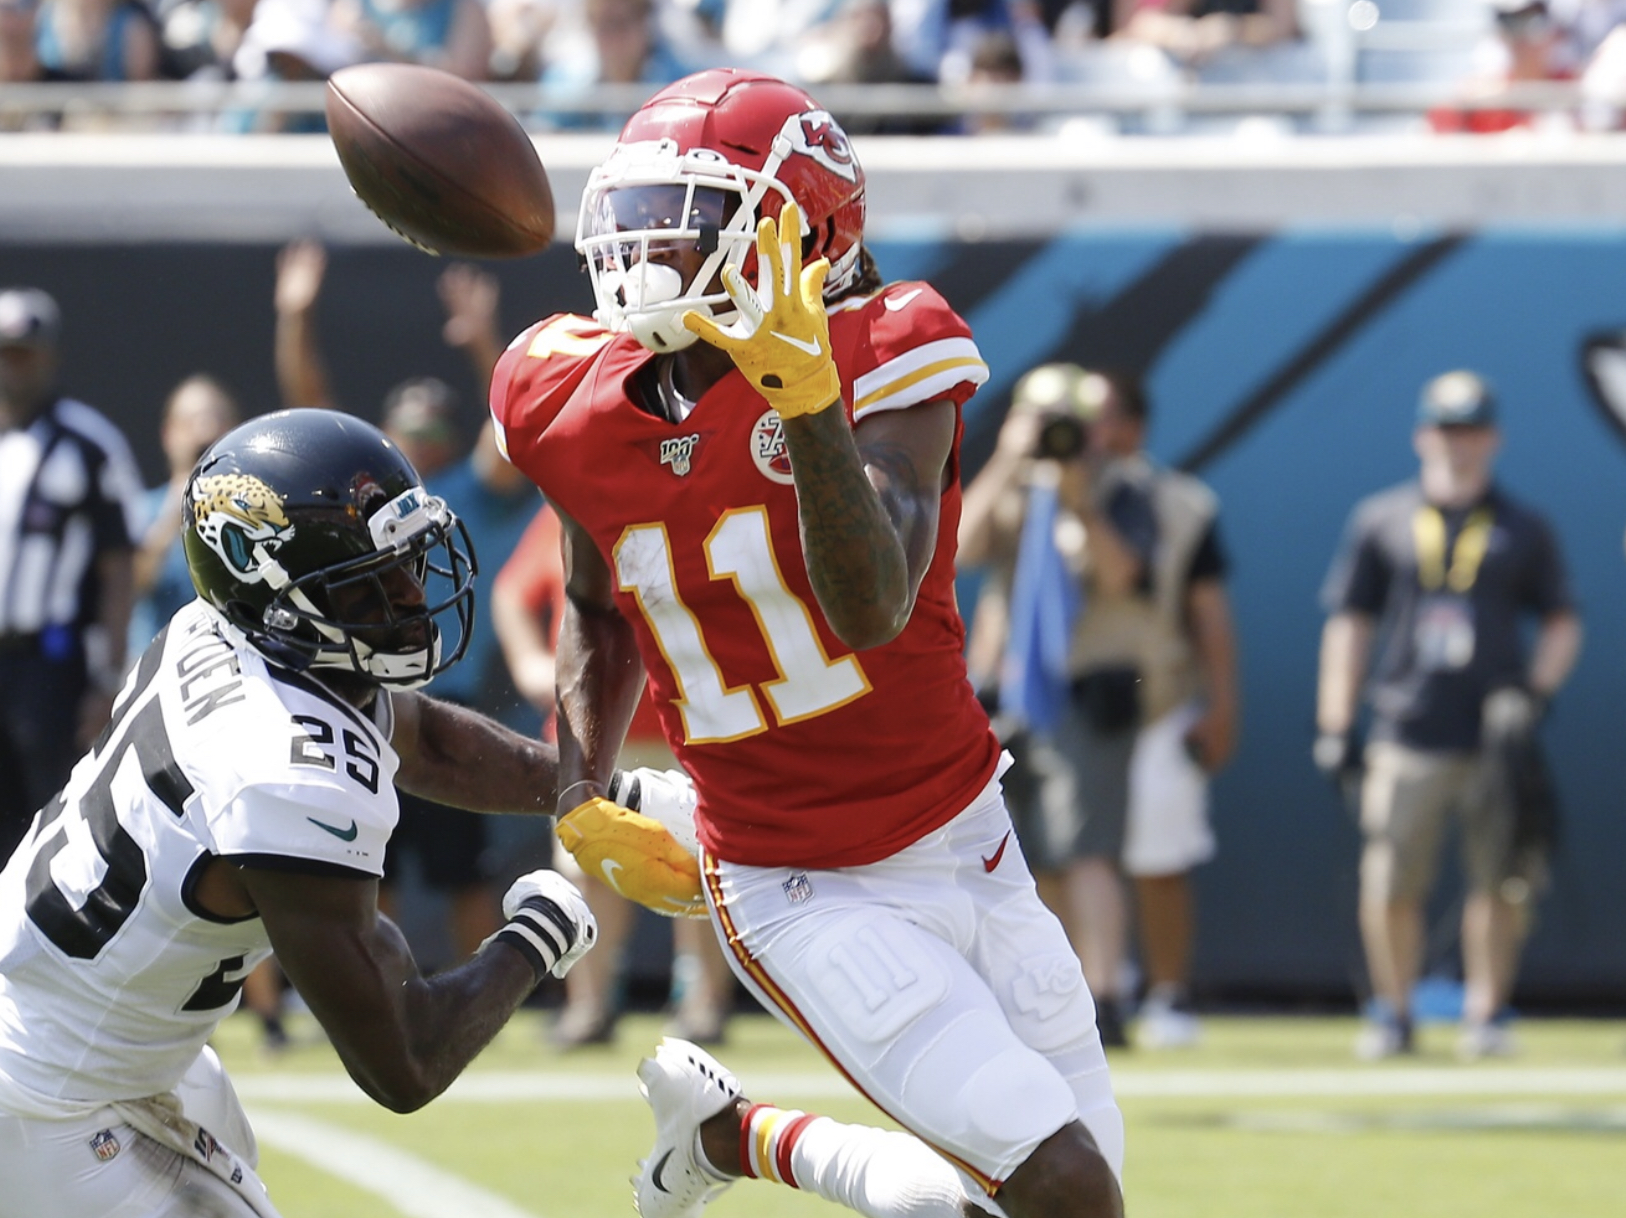 WATCH: Chiefs’ Demarcus Robinson with great TD catch1626 x 1218